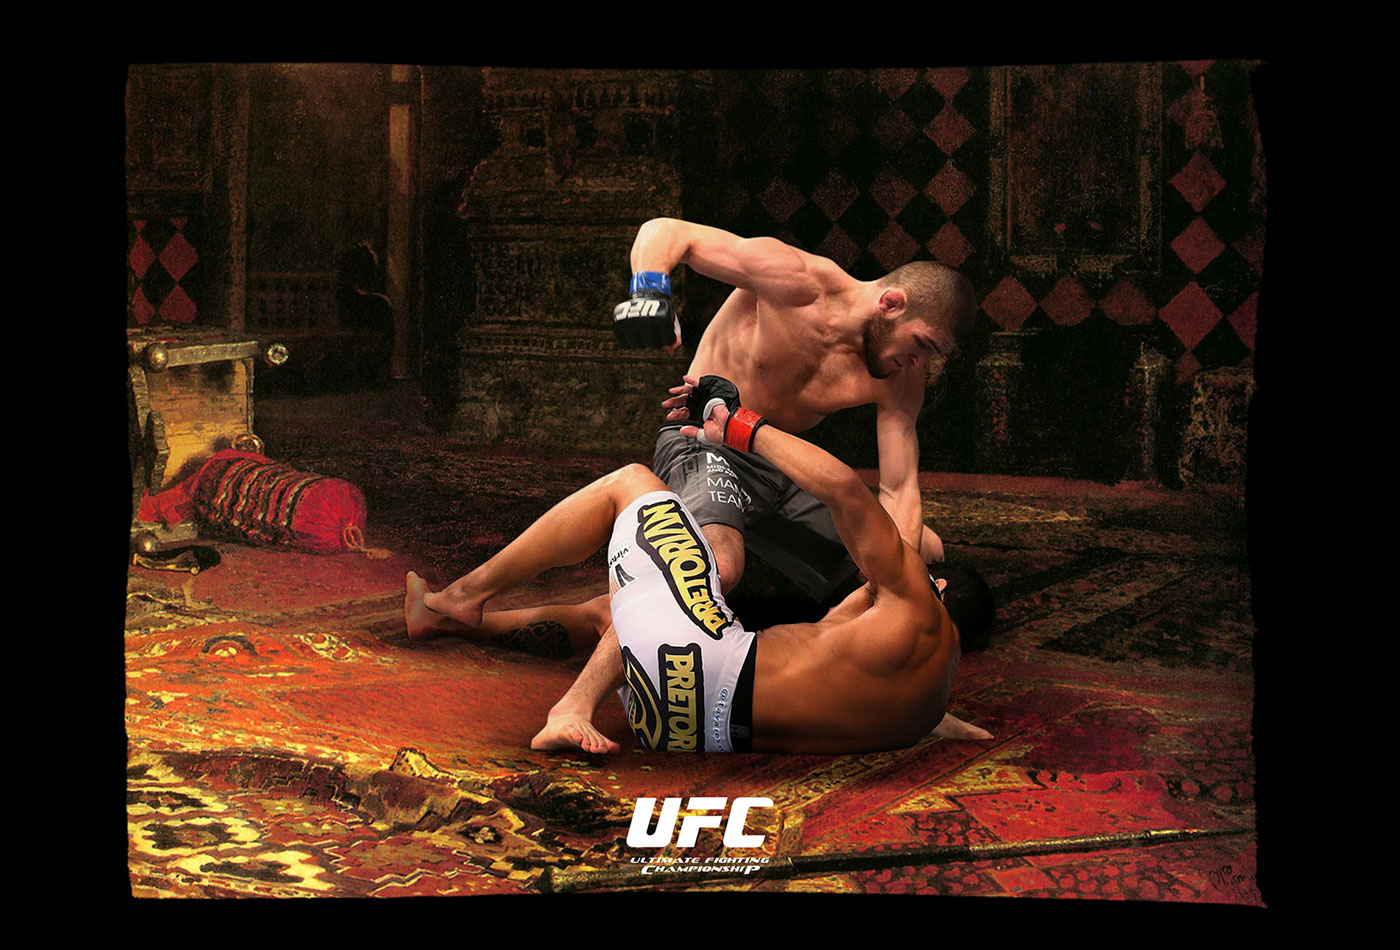 collage UFC MMA contemporary UFC ART Mixed martial arts Digital Collage figter themed art ufc fan art bkzcreative